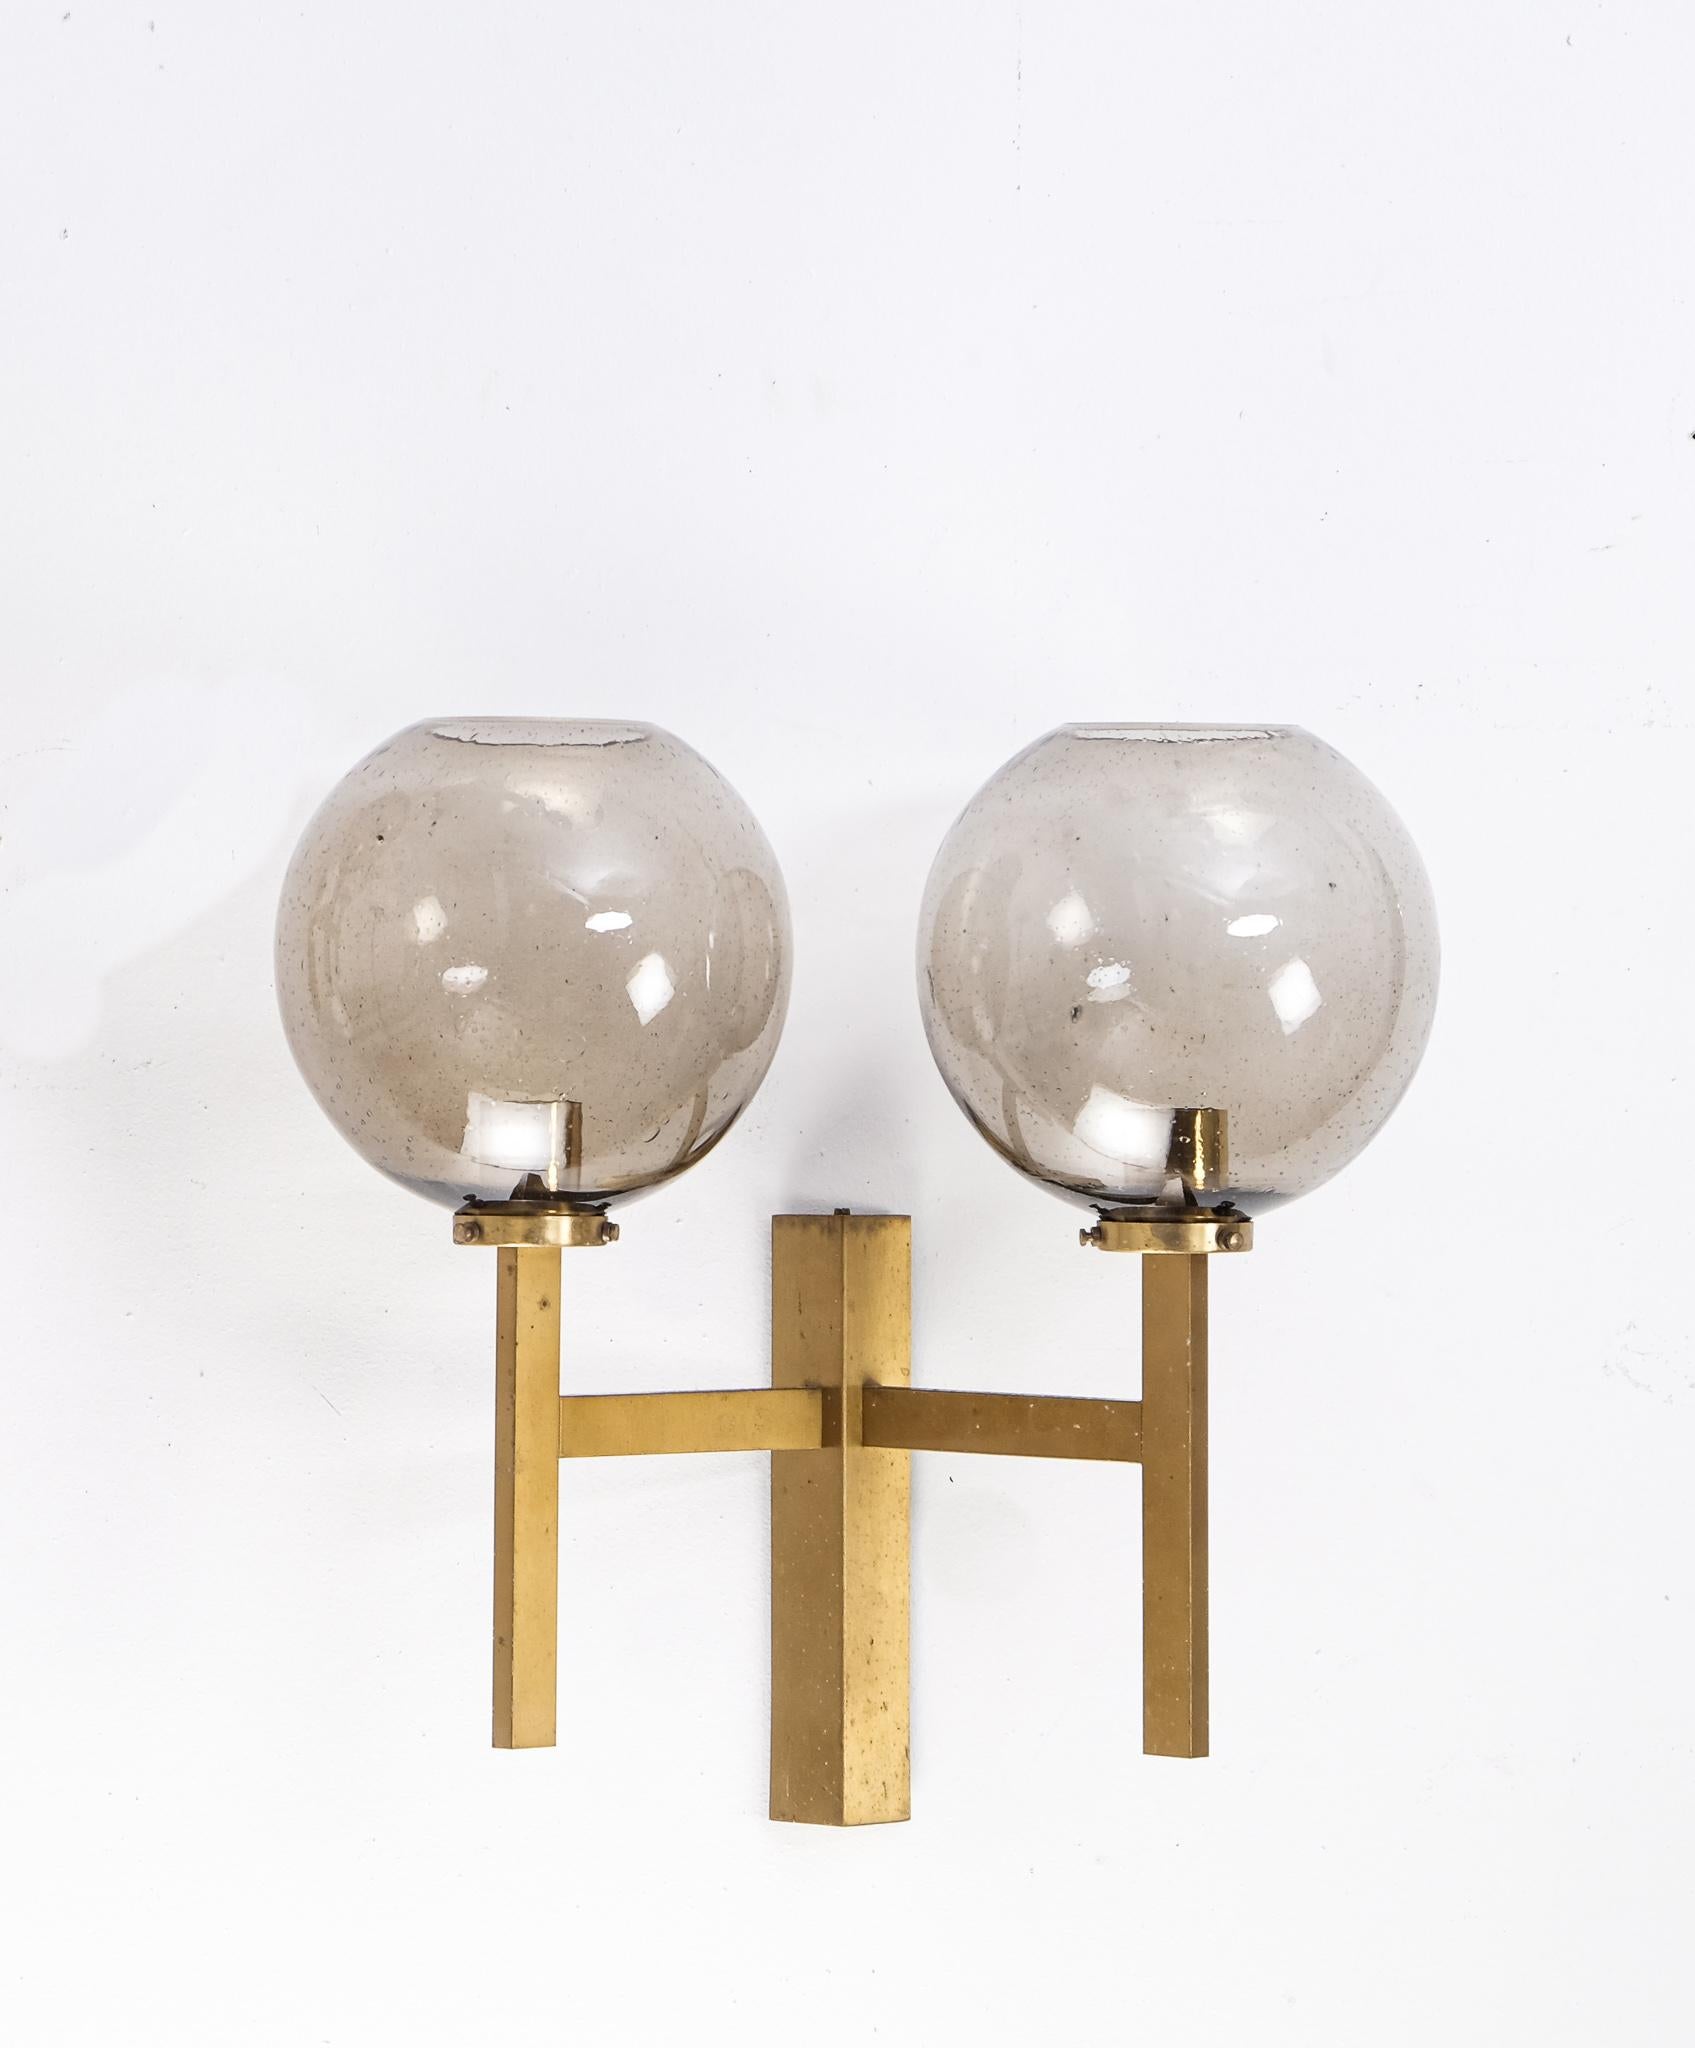 Mid-20th Century Set of 3 Large Brass Wall Lamps by Holger Johansson, Sweden, 1960s For Sale